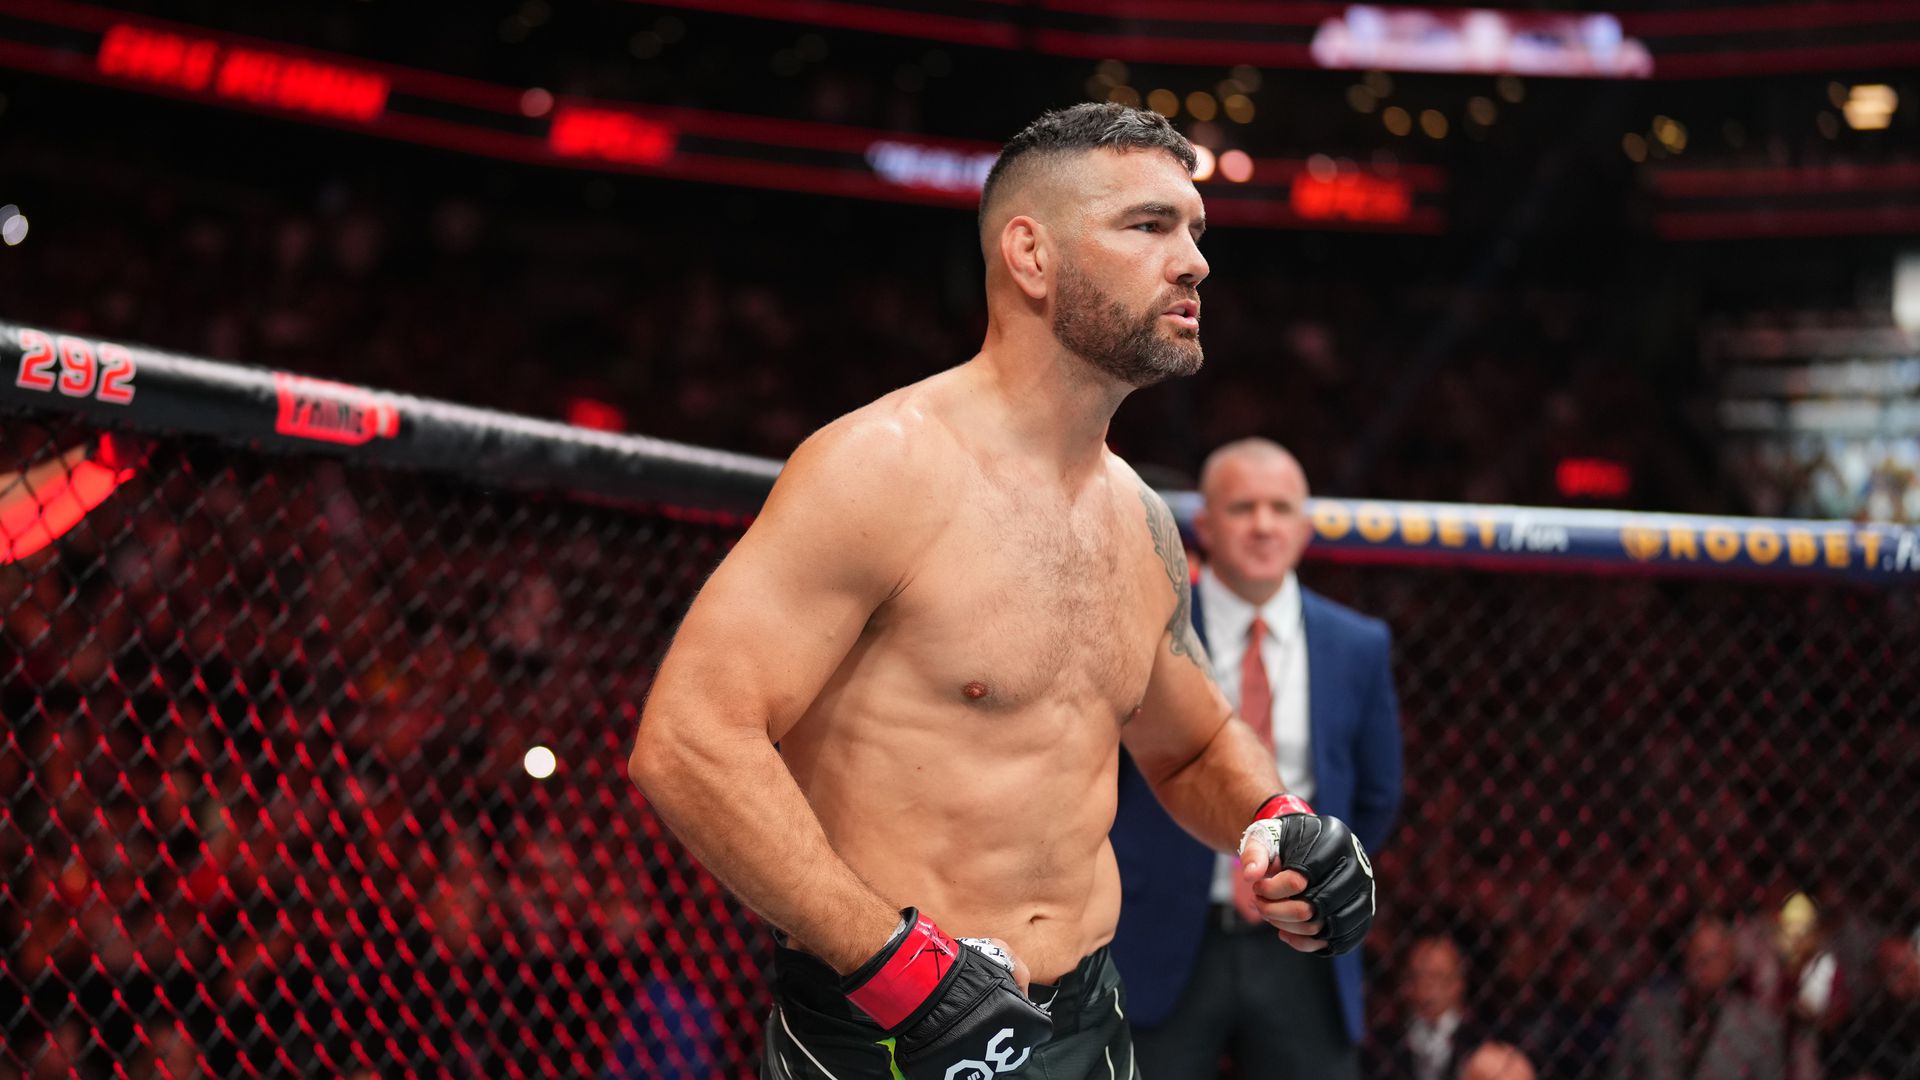 chris weidman admits his body is ‘just taking a beating’ in recent years: ‘this could be my last fight’